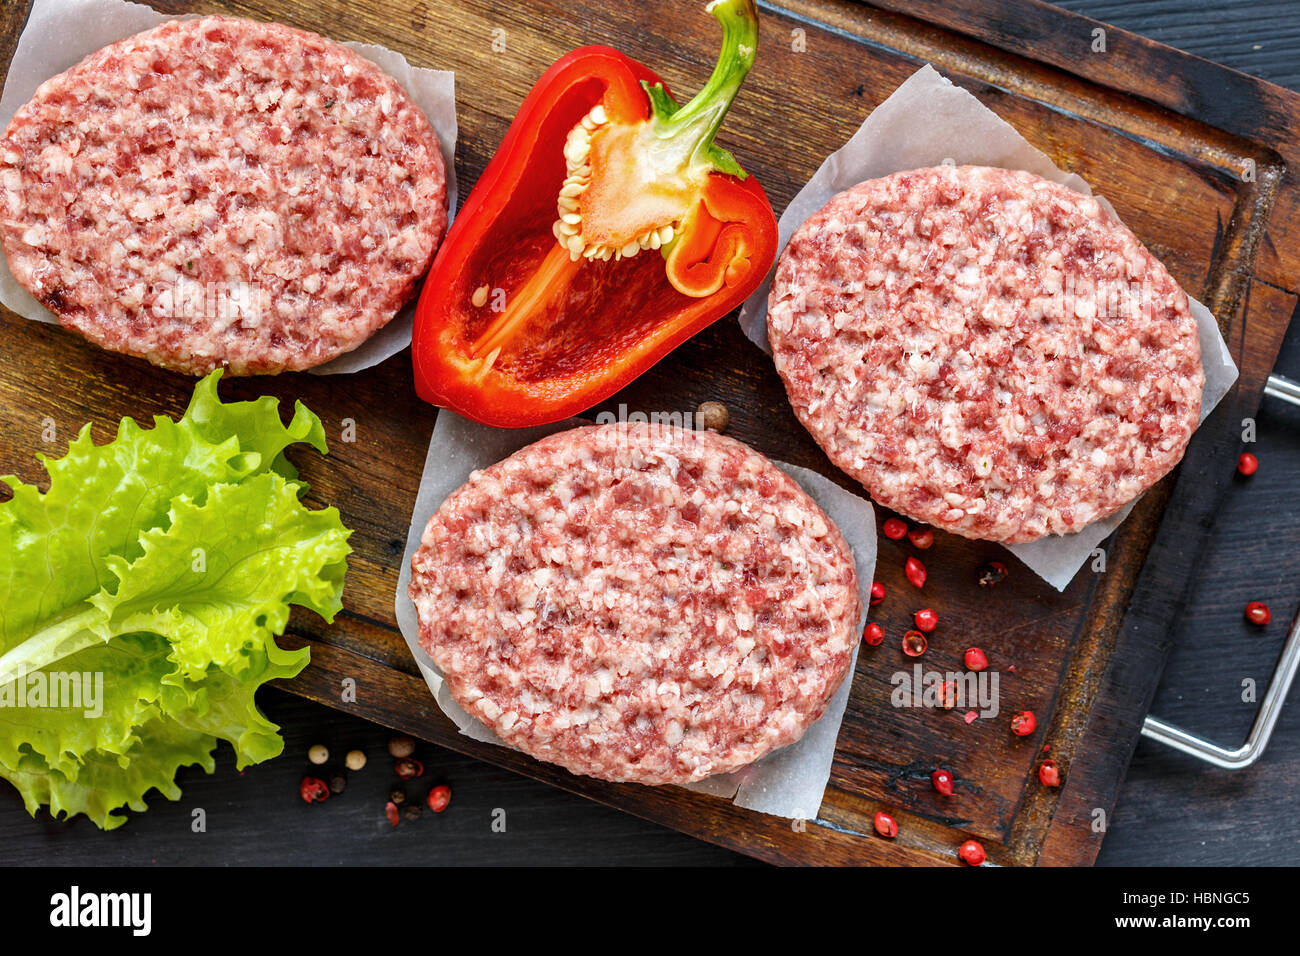 Raw beef cutlets and red pepper. Stock Photo